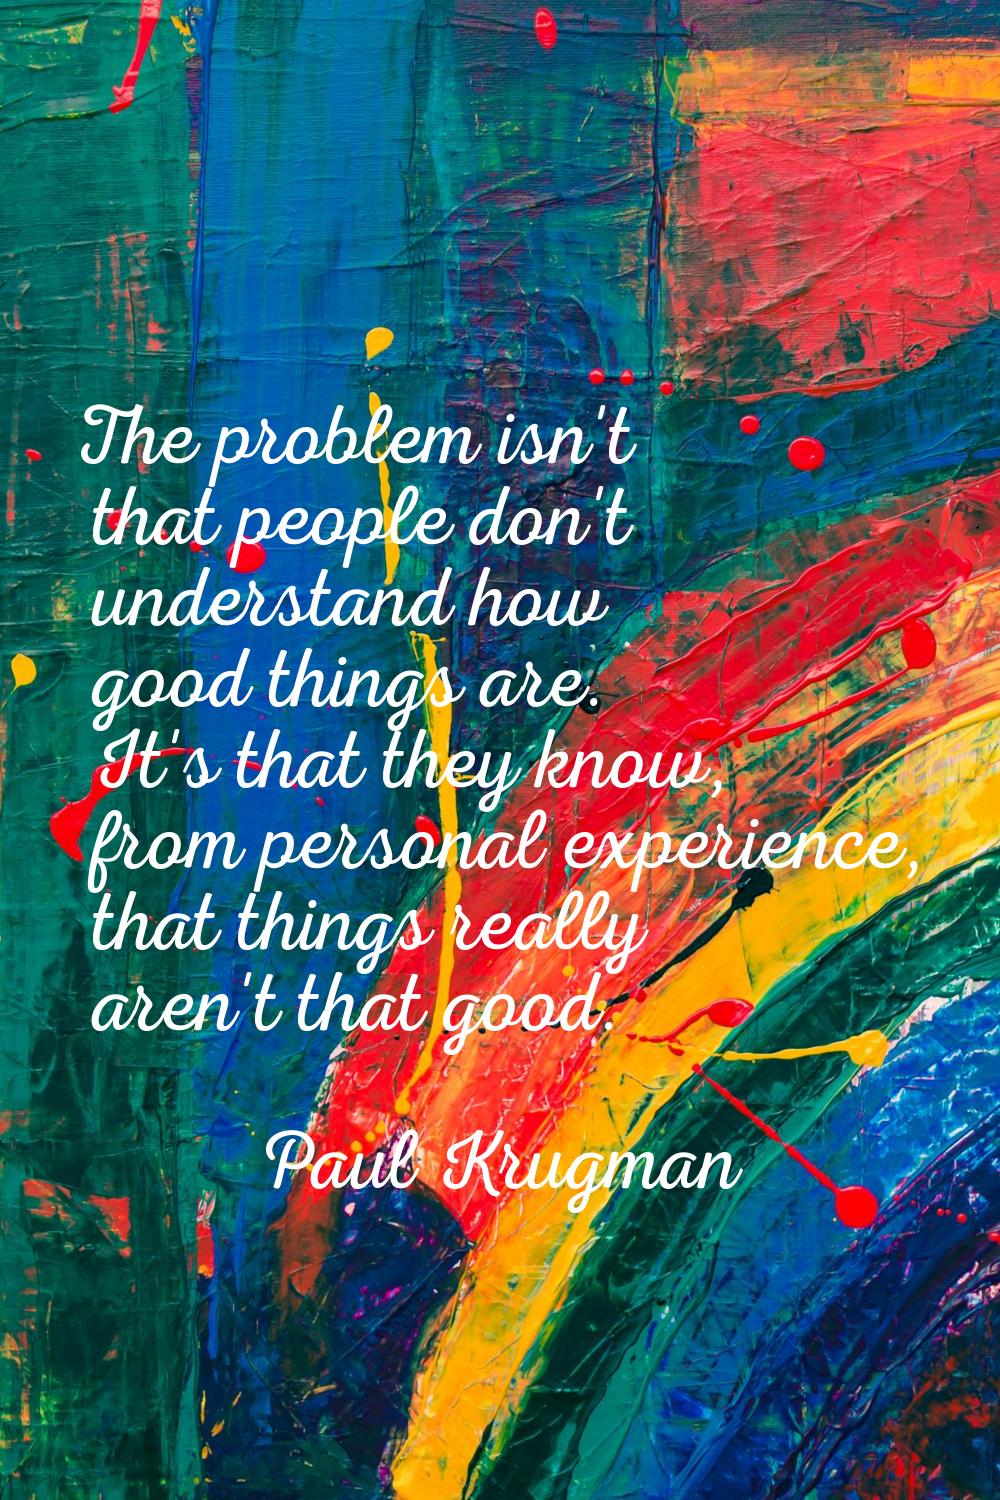 The problem isn't that people don't understand how good things are. It's that they know, from perso